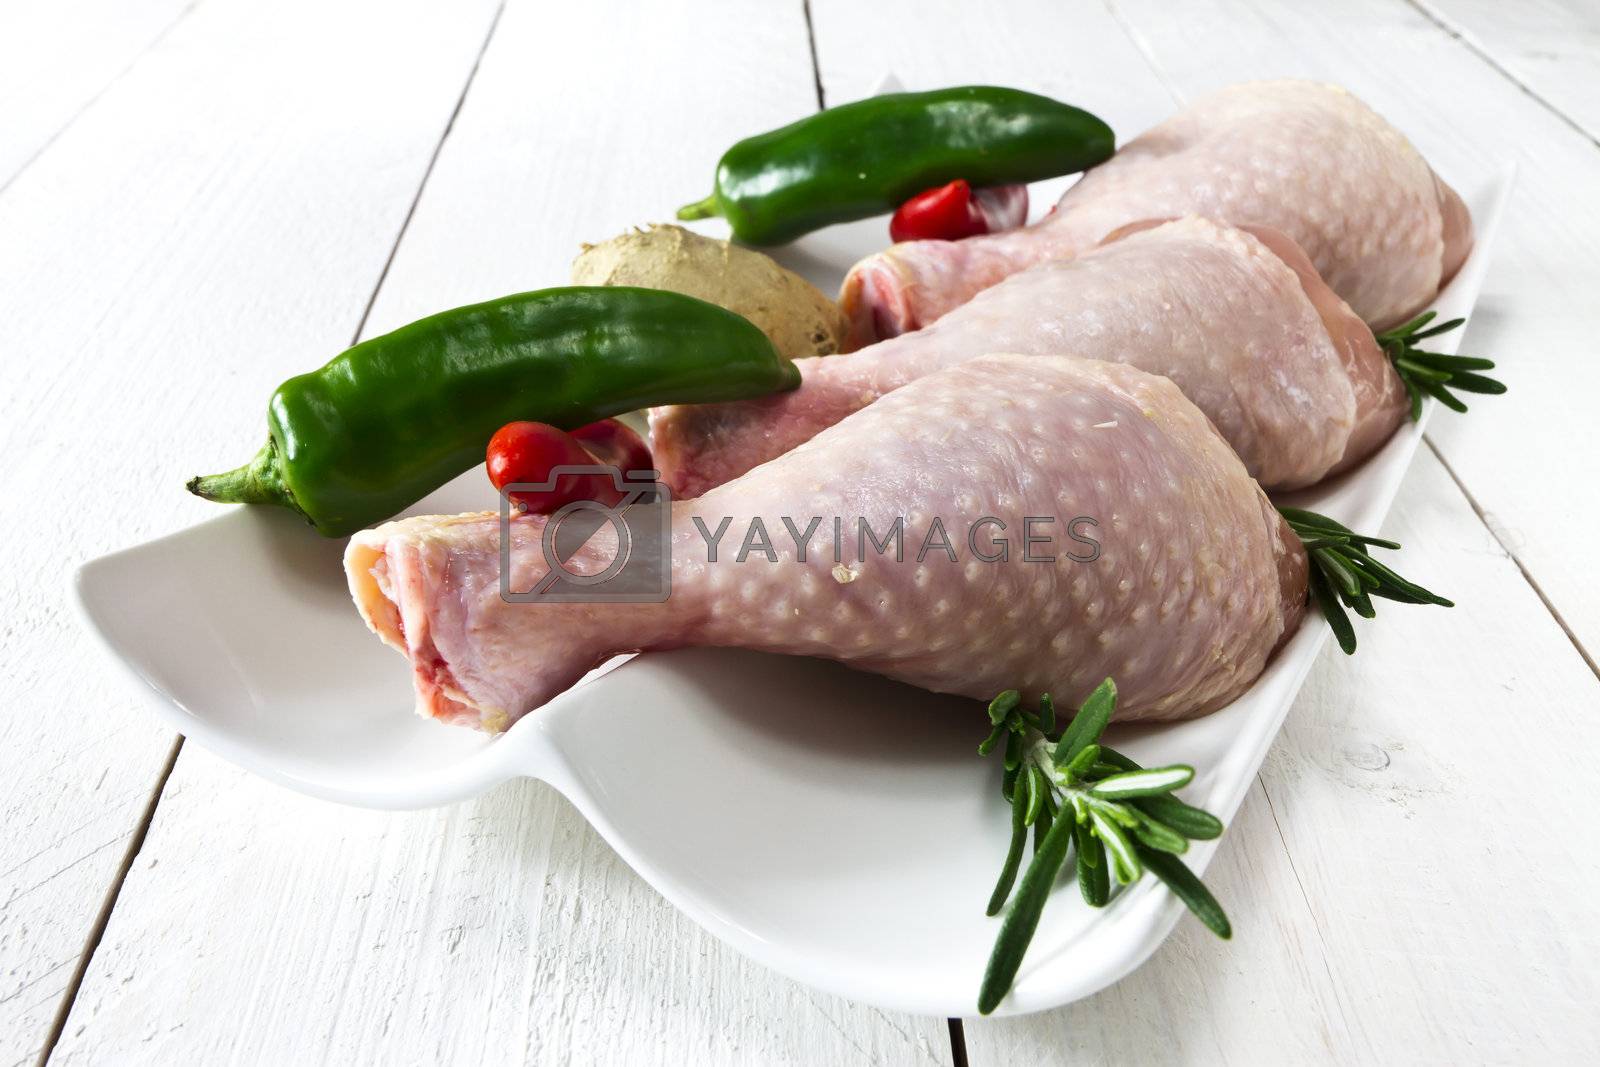 Royalty free image of Fresh chicken drumsticks by caldix